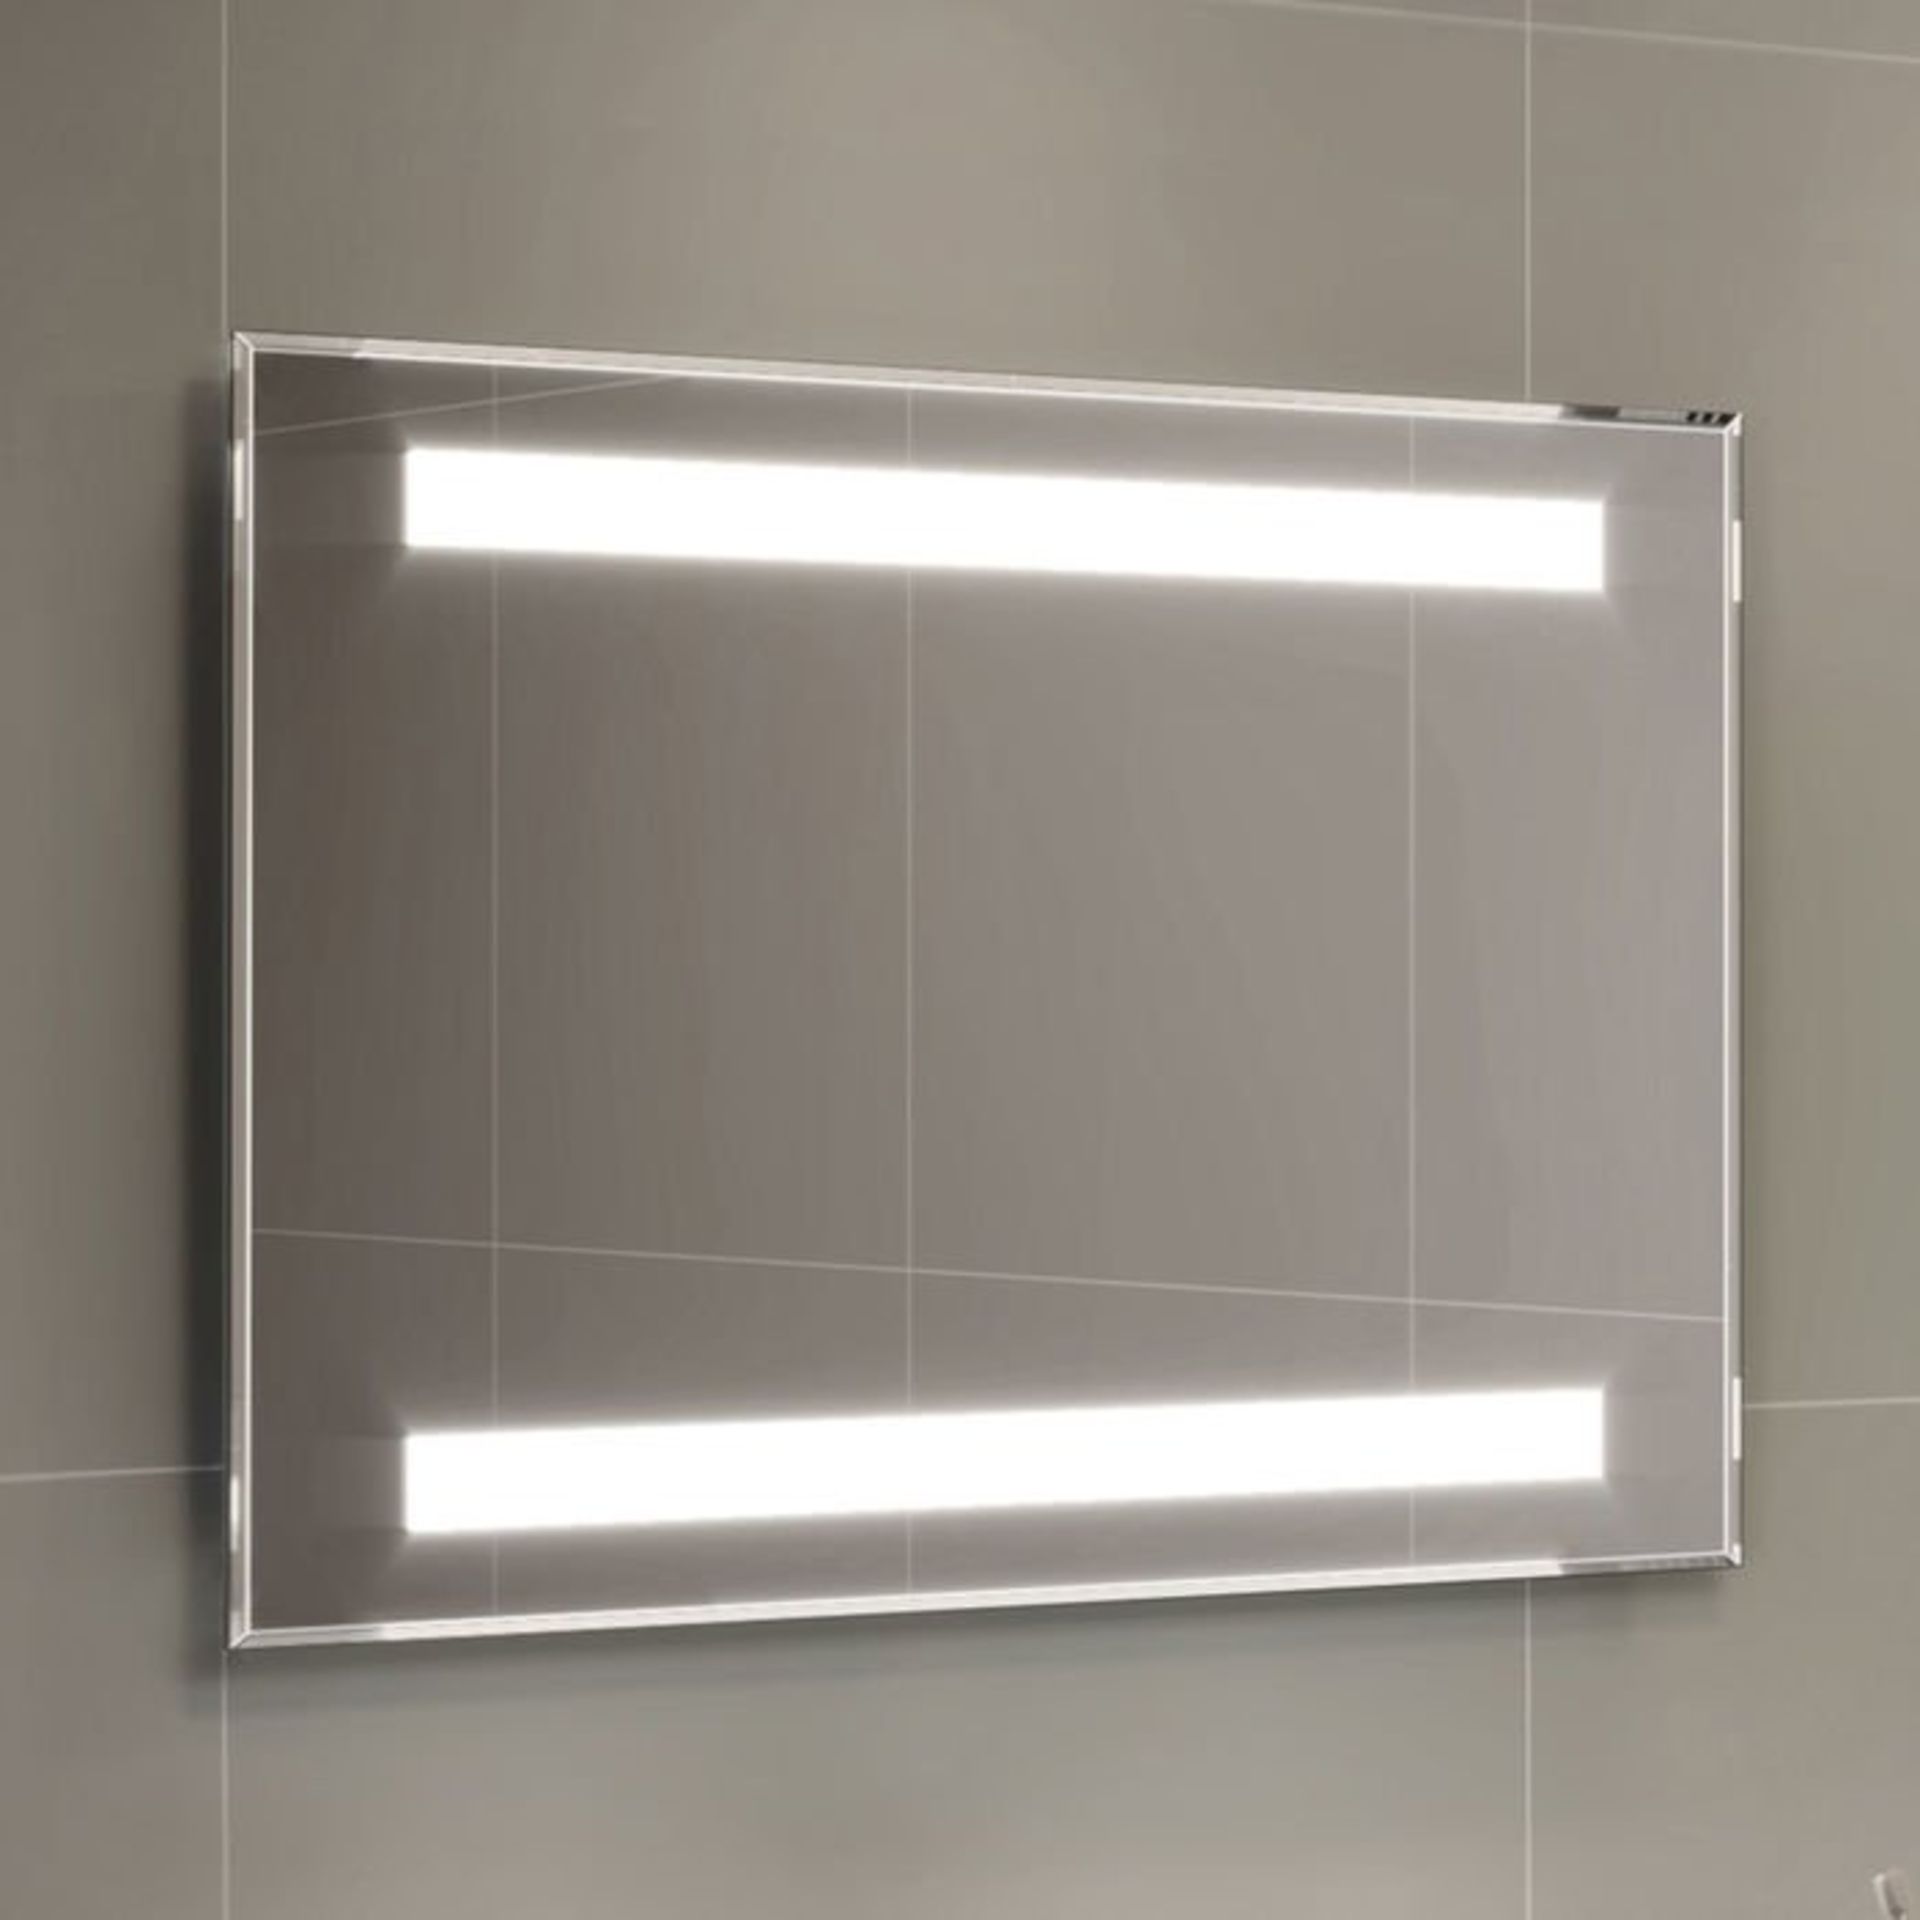 (L1) 500x700mm Omega Illuminated LED Mirror. RRP £349.99._x00D_Energy efficient LED lighting with - Image 2 of 3